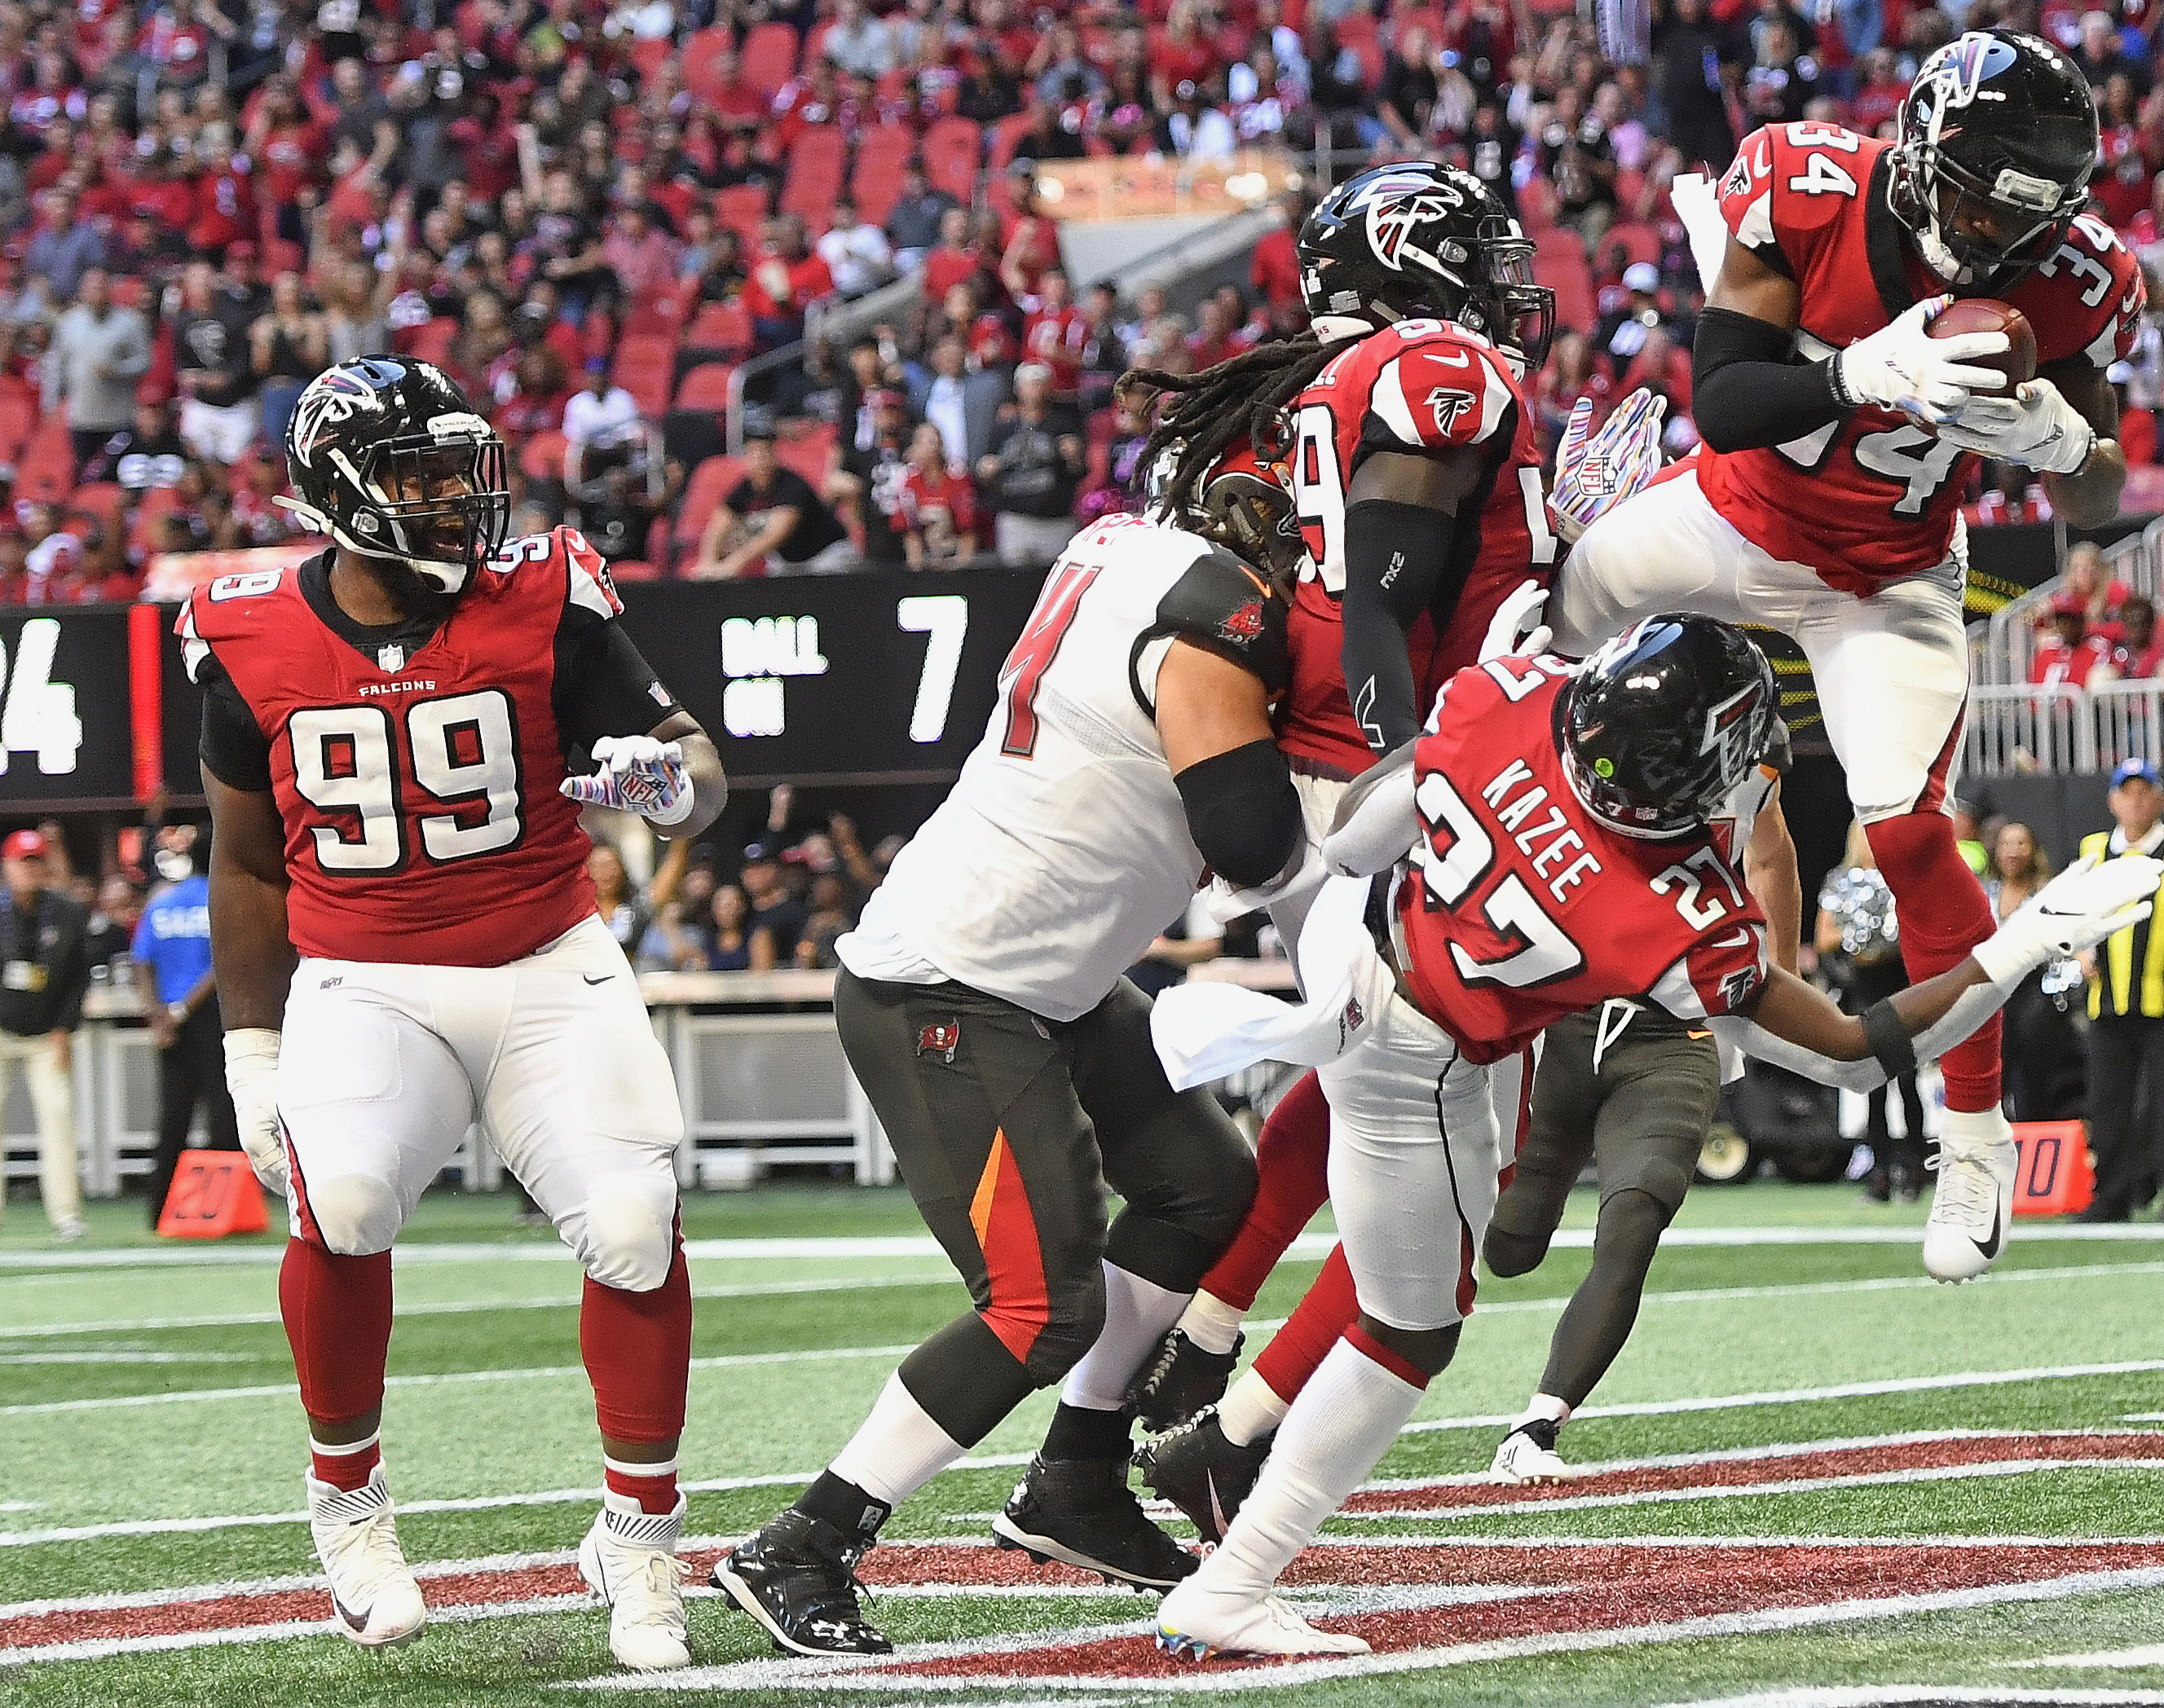 Ryan throws 3 TD passes, Falcons hold off Bucs 34-29